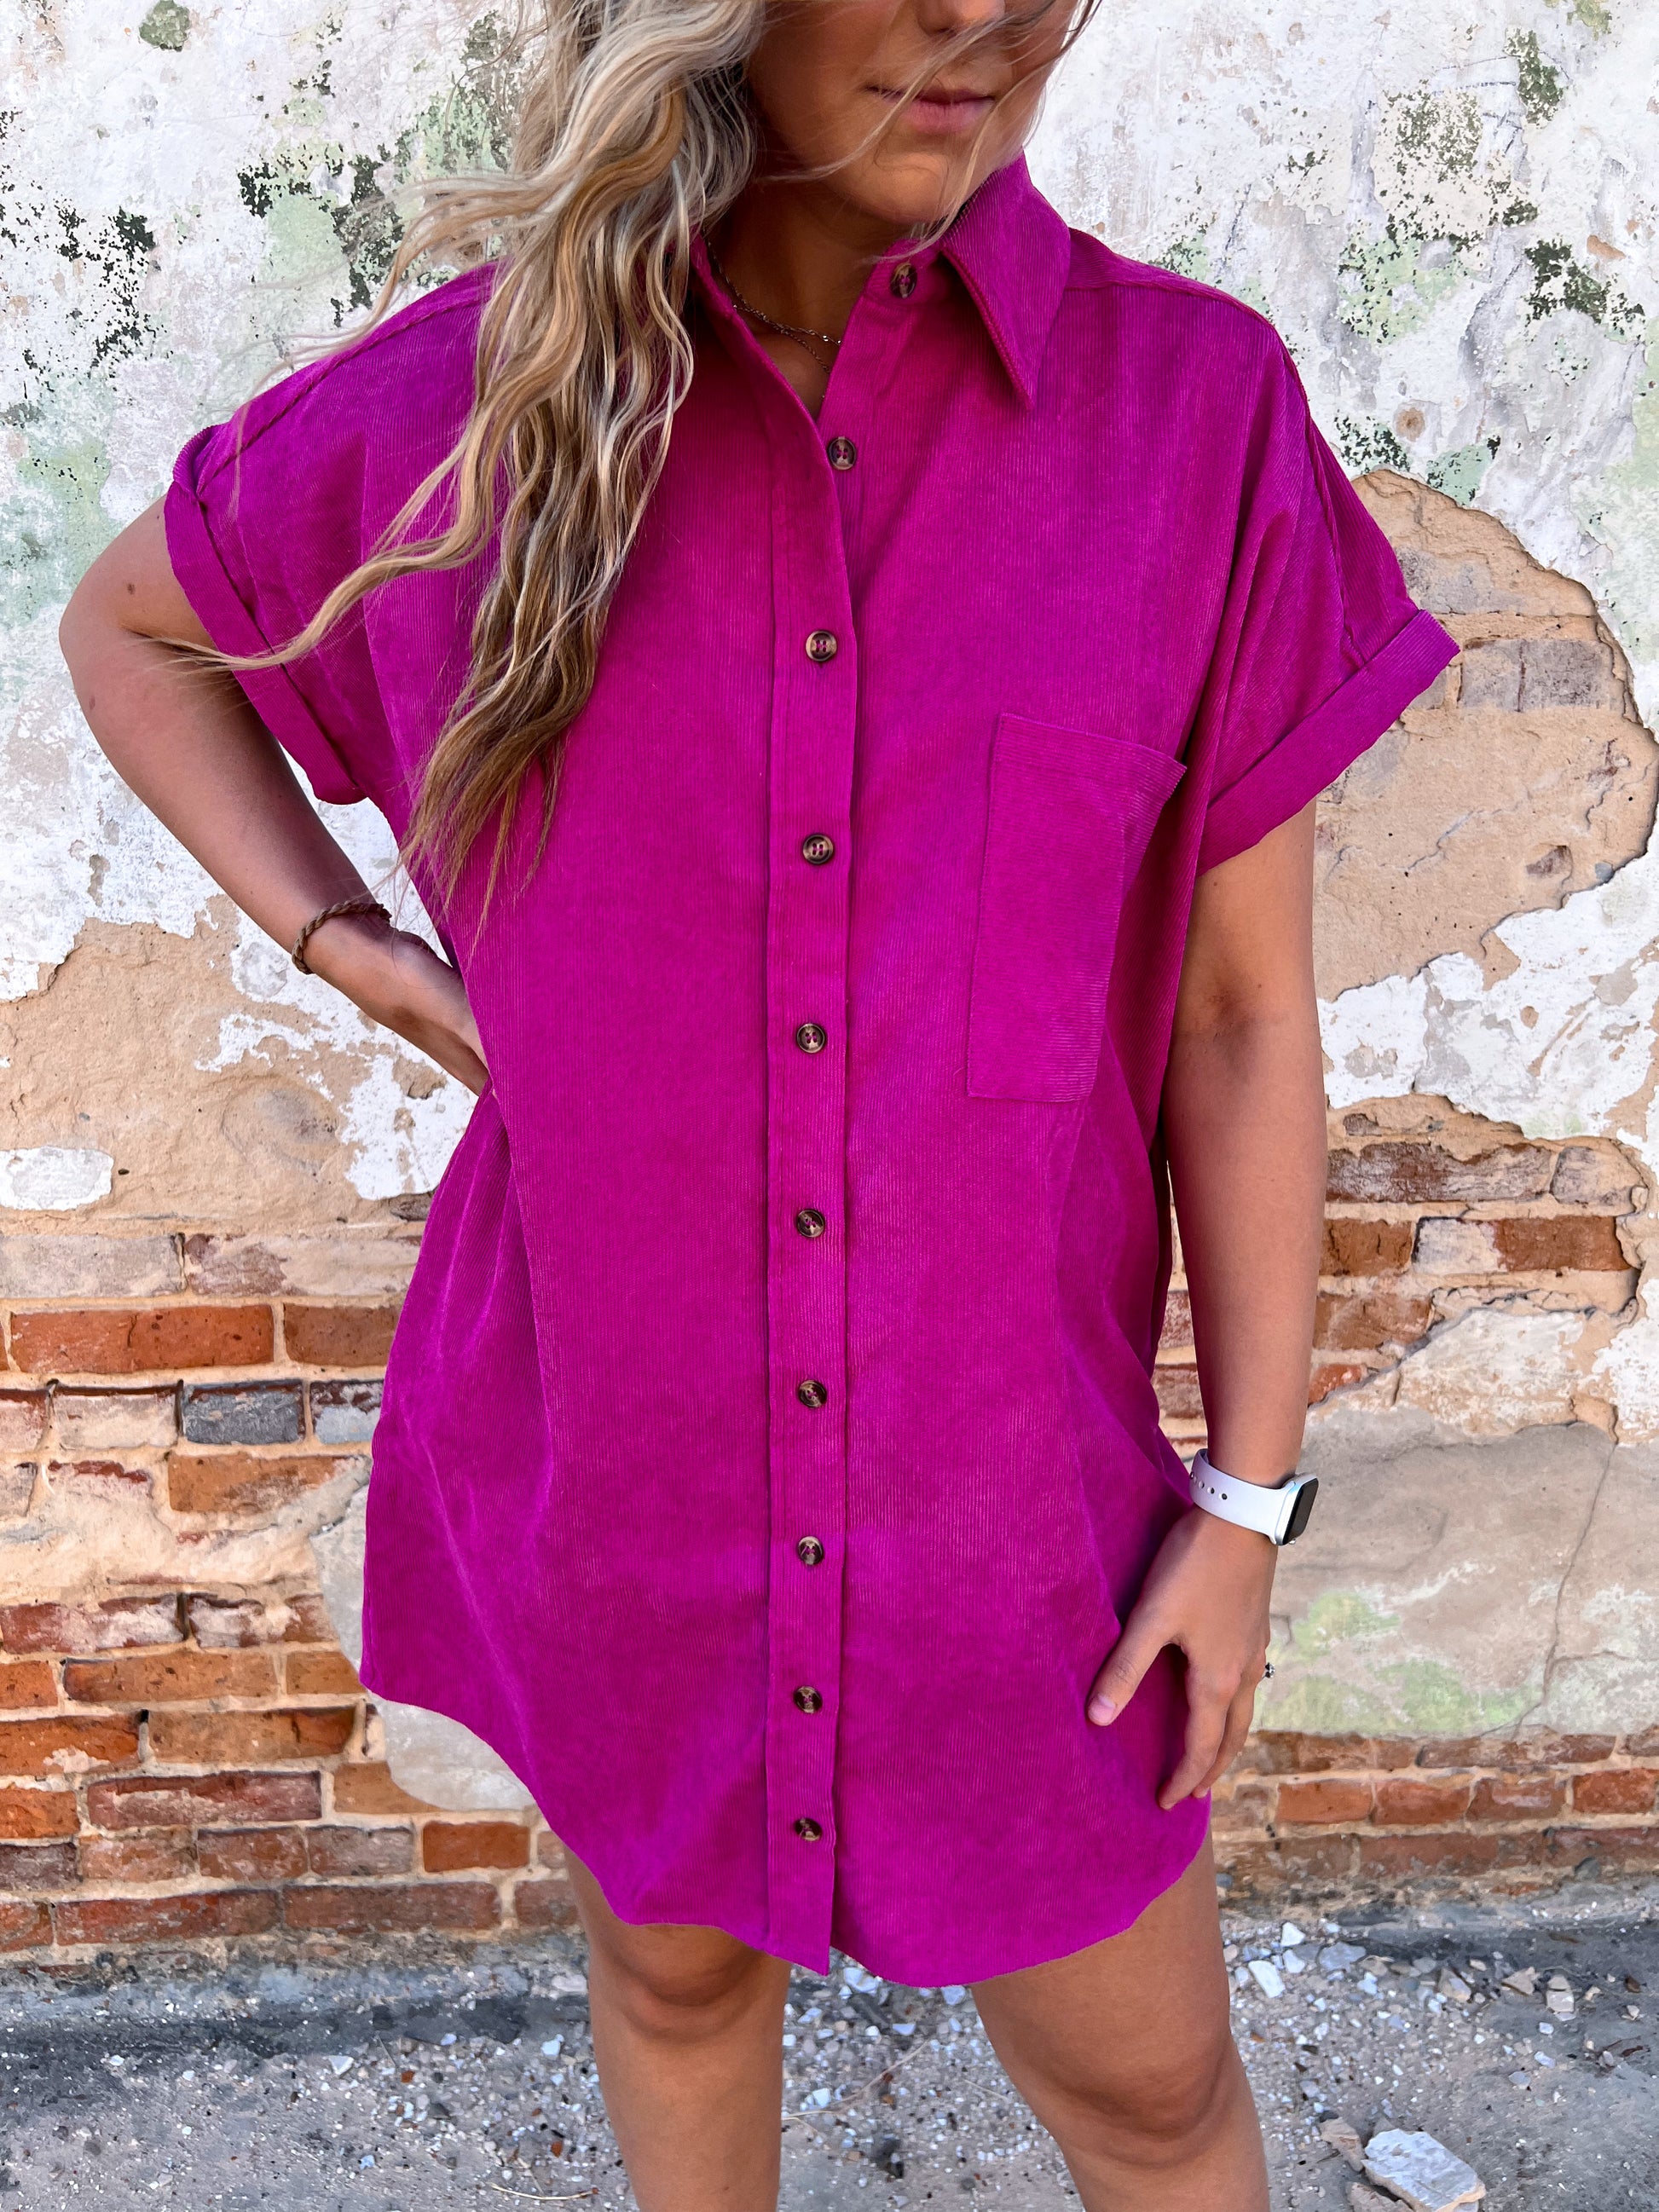 Samantha Solid corduroy button down short sleeve dress-dress-Entro-11/28/23 md, 1st md, BIN A3-The Twisted Chandelier